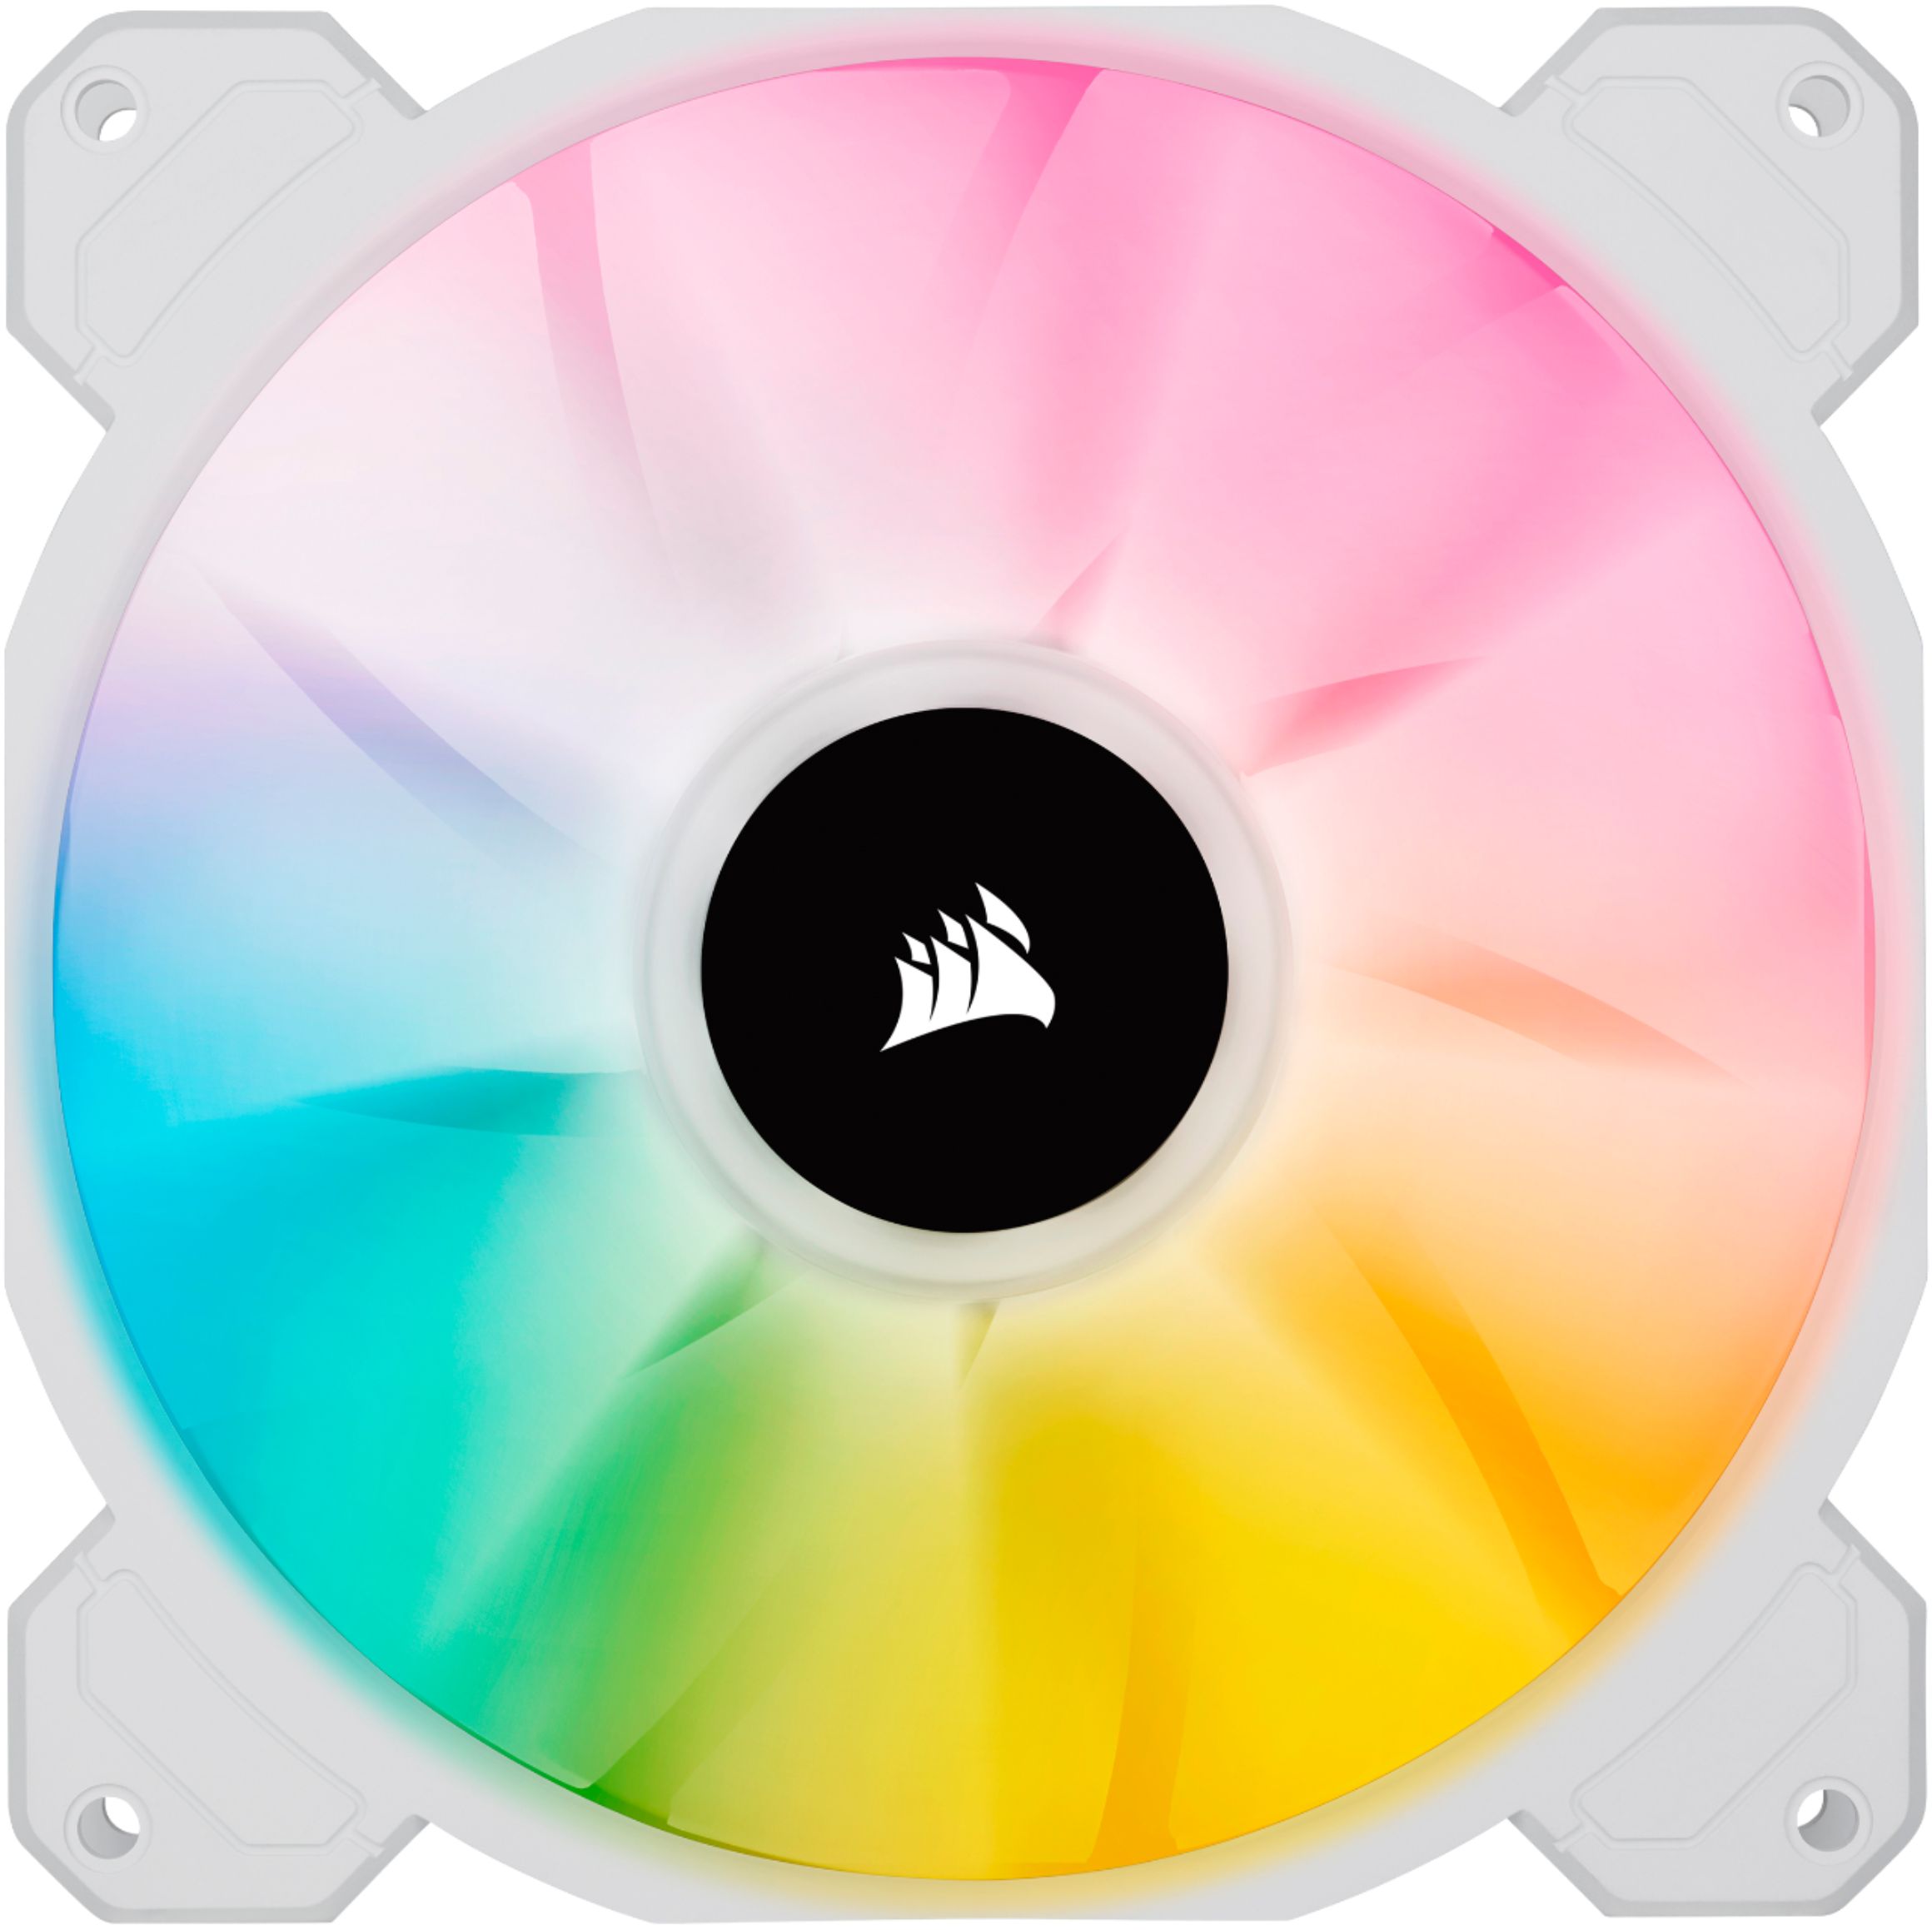 iCUE White CORSAIR SP140 CORE Node Best Buy Lighting Kit White Fan ELITE Dual - PWM iCUE RGB Performance CO-9050139-WW 140mm with